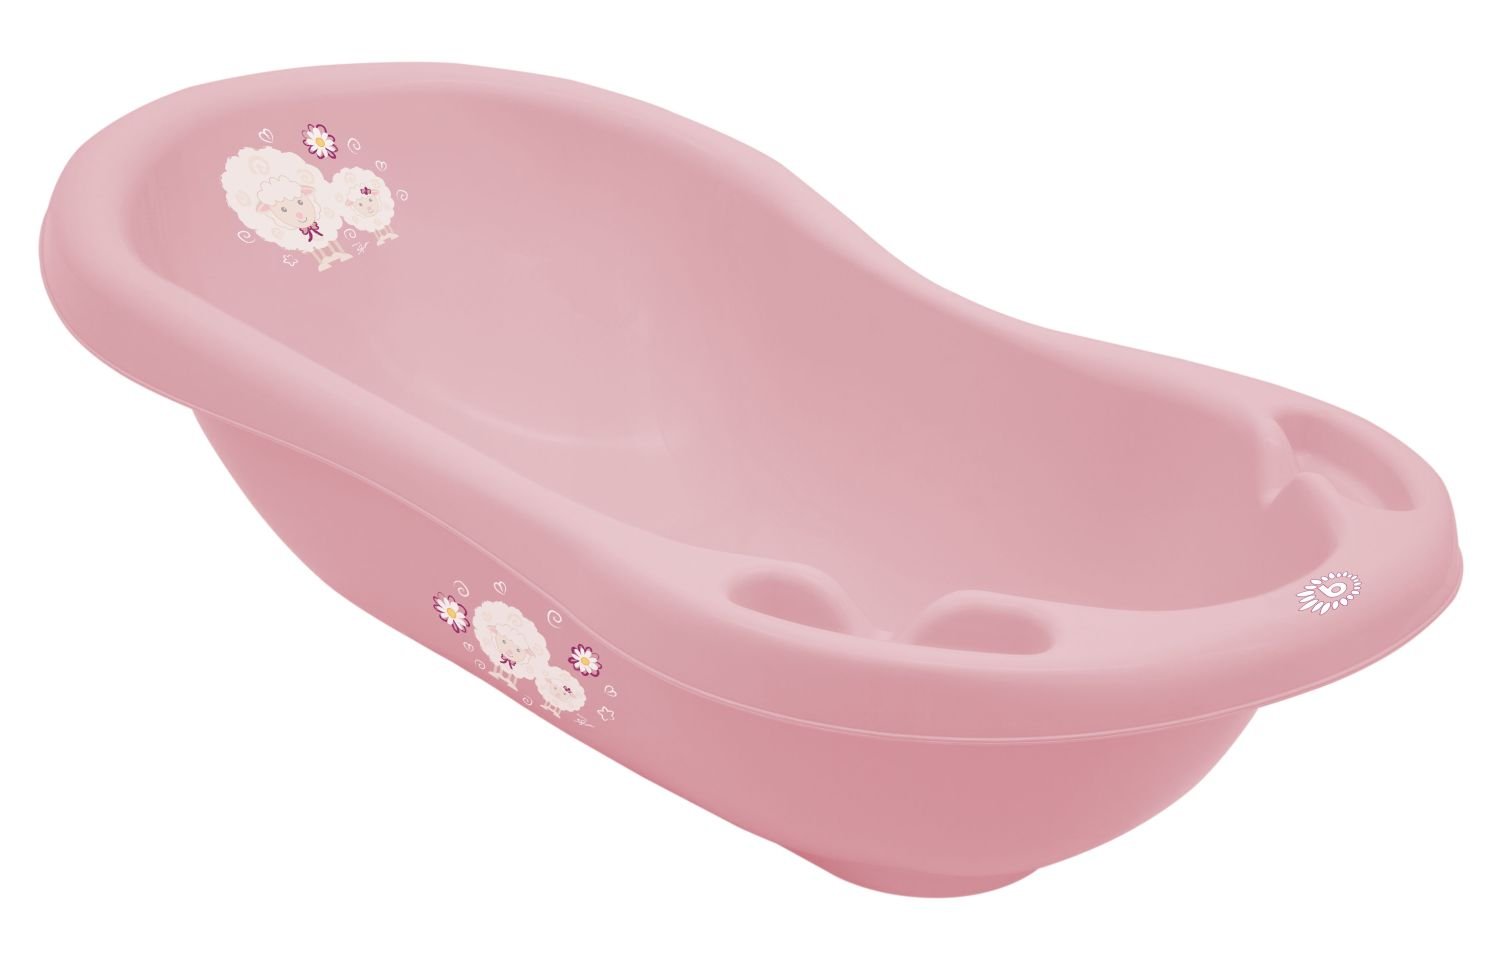 Bieco Ergonomic Baby Bath Trend Pink, from 0 to 36 Months, 100 cm, Non-Toxic Bath with Plug for Newborns, Very Durable, Made in Europe, 11181408